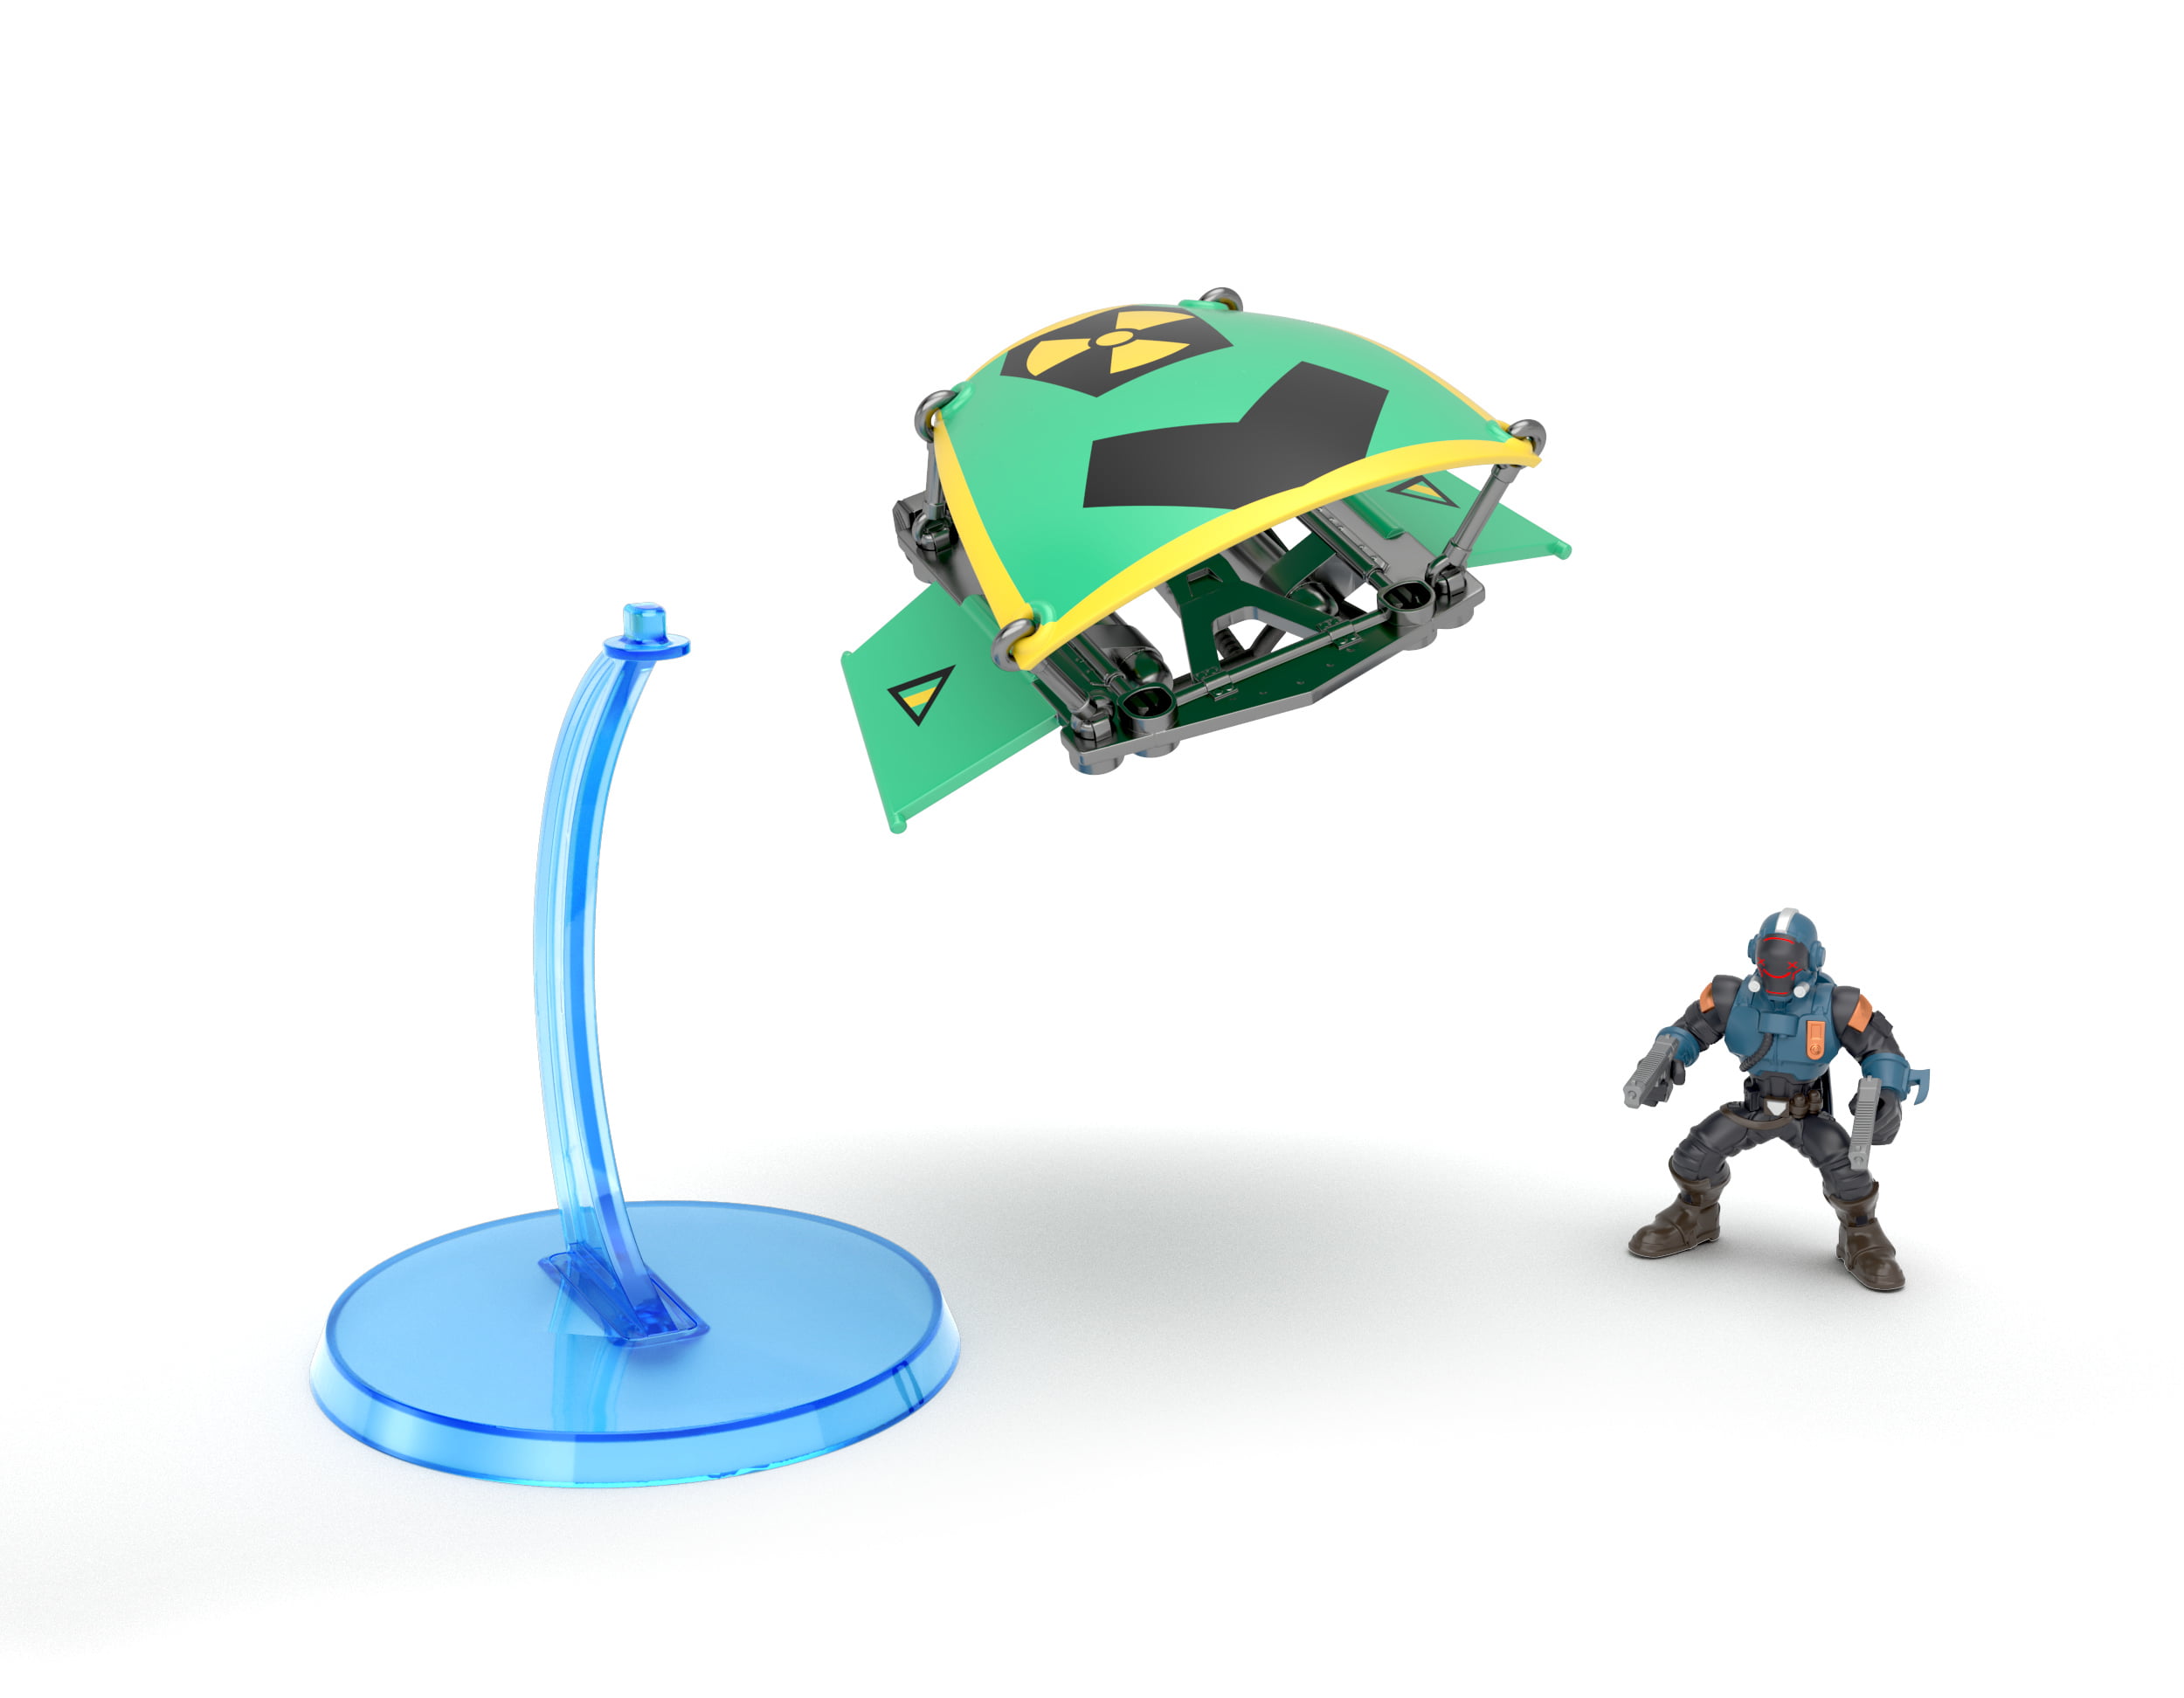 Fortnite Battle Royale Glider And Mini Figure Style May Vary Walmart Com